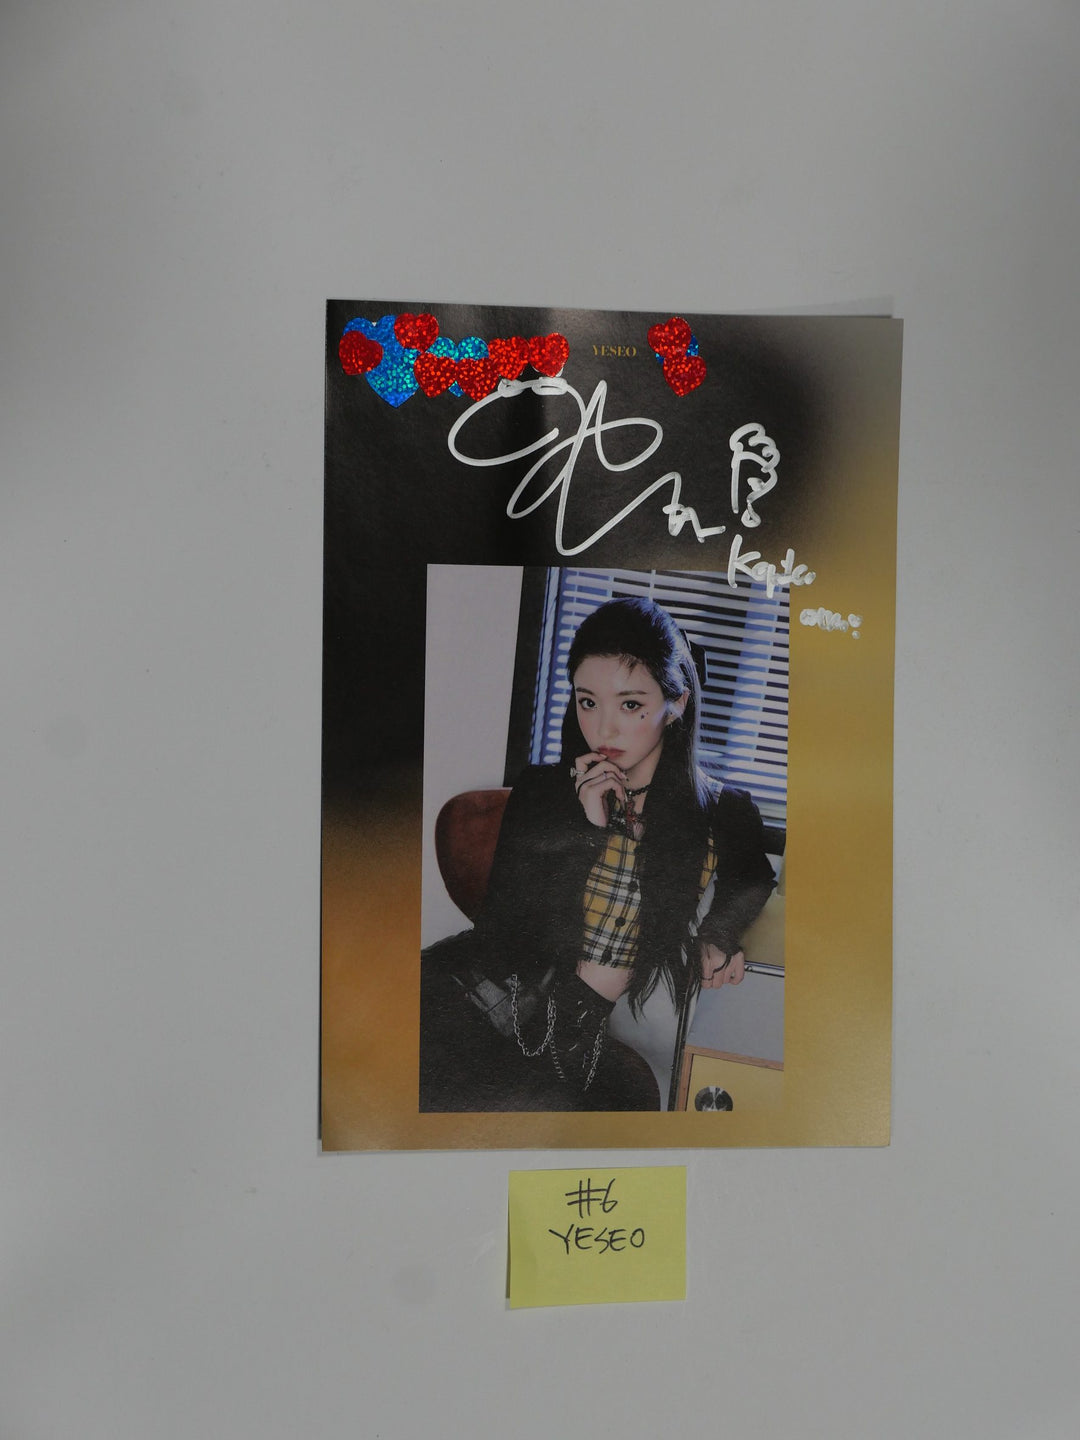 Kep1er "First Impact" 1st - A Cut Page From Fansign Event Album [BAHIYYIH, YOUNGEUN, YESEO]